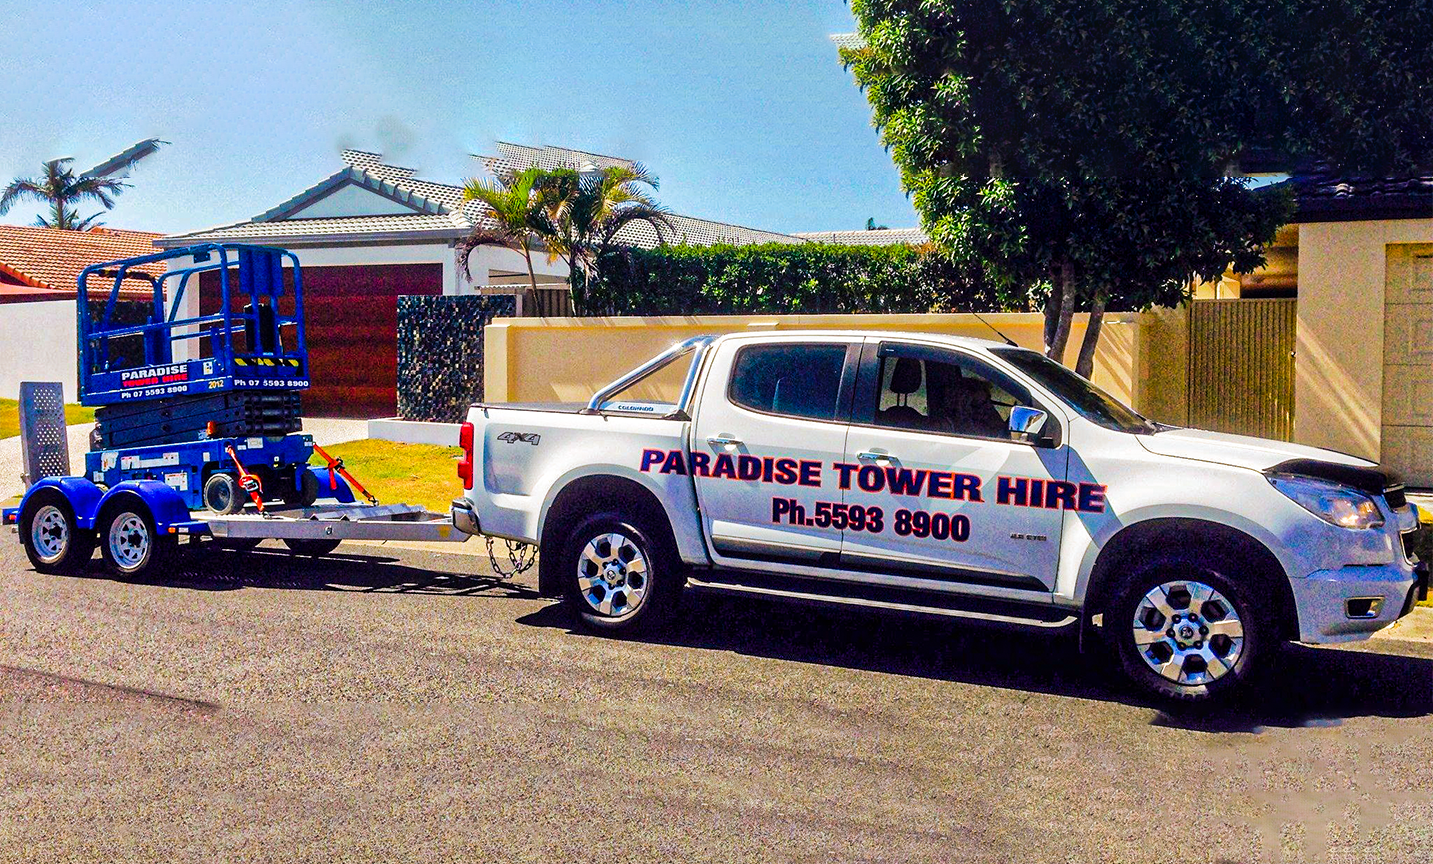 Experts and high quality scissor lifts and cherry picker hire prodivers on the Gold Coast